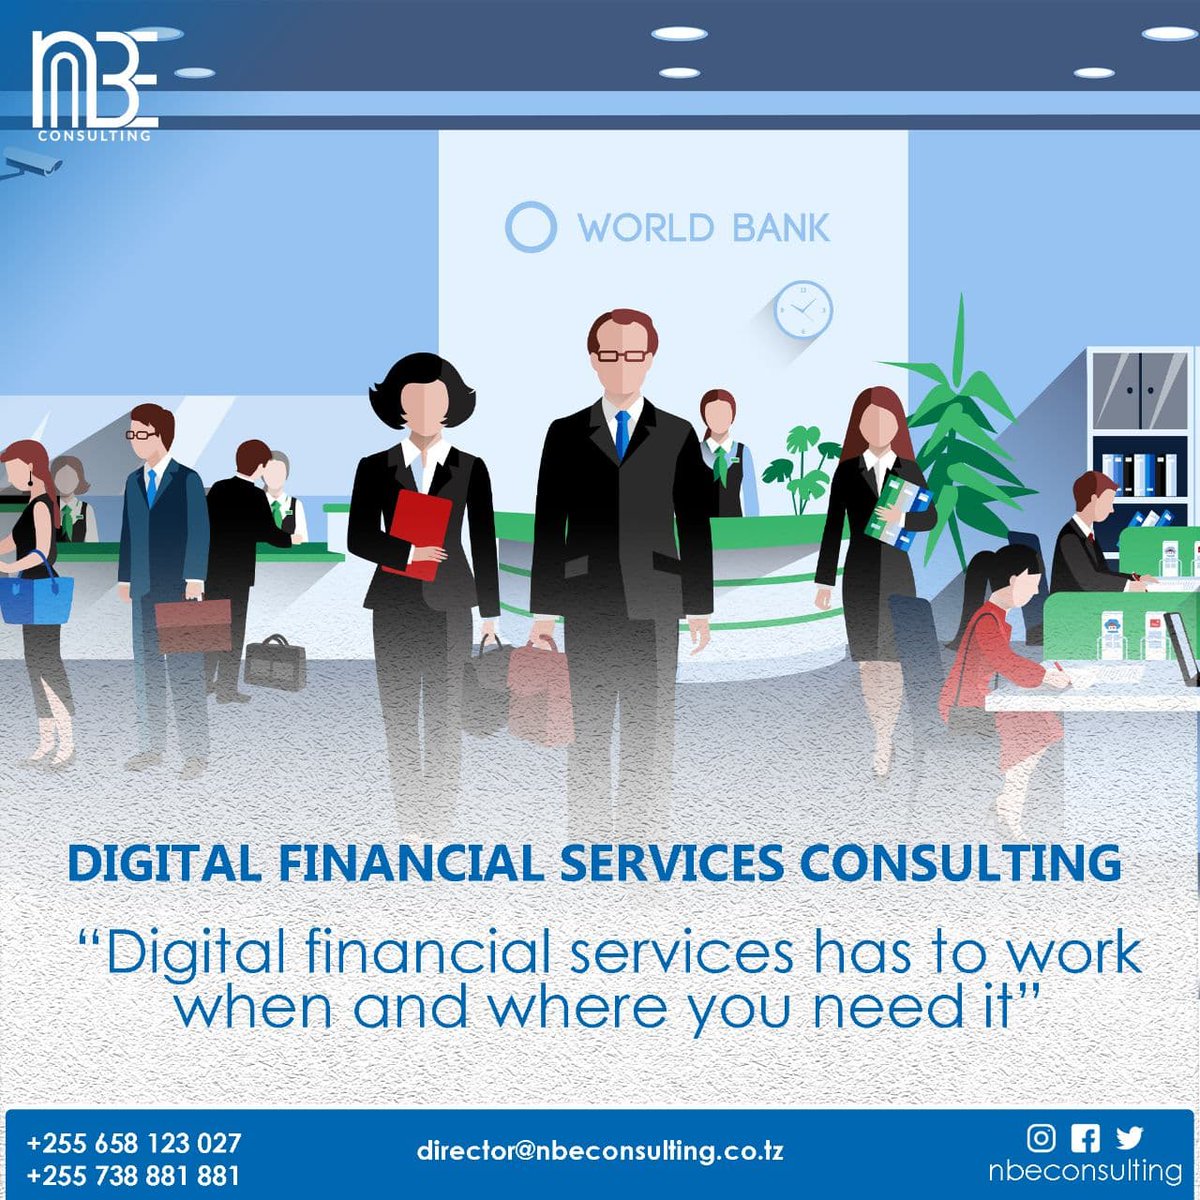 We develop a Strategy & Execute on Your Behalf.
Contact us today for more.
#MobileFinancialServices
#MerchantPayments
#AgencyBanking
#Financialinclusion
#NBEConsulting